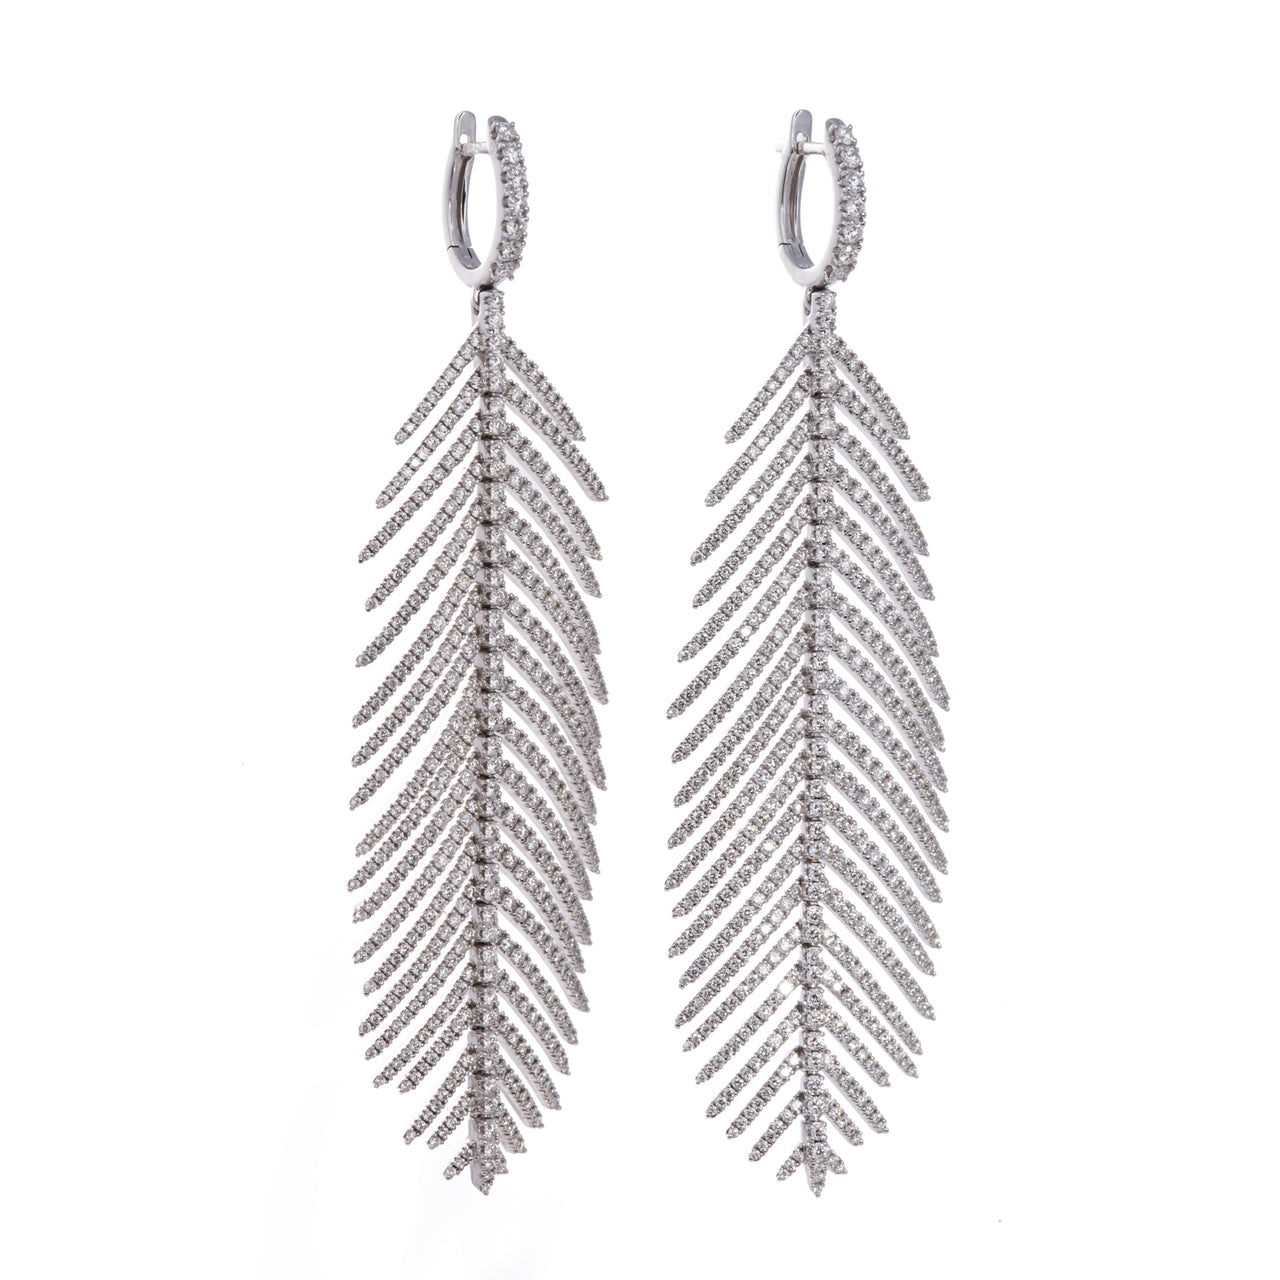 Feathers That Move Earrings with Grey Diamond Pavé